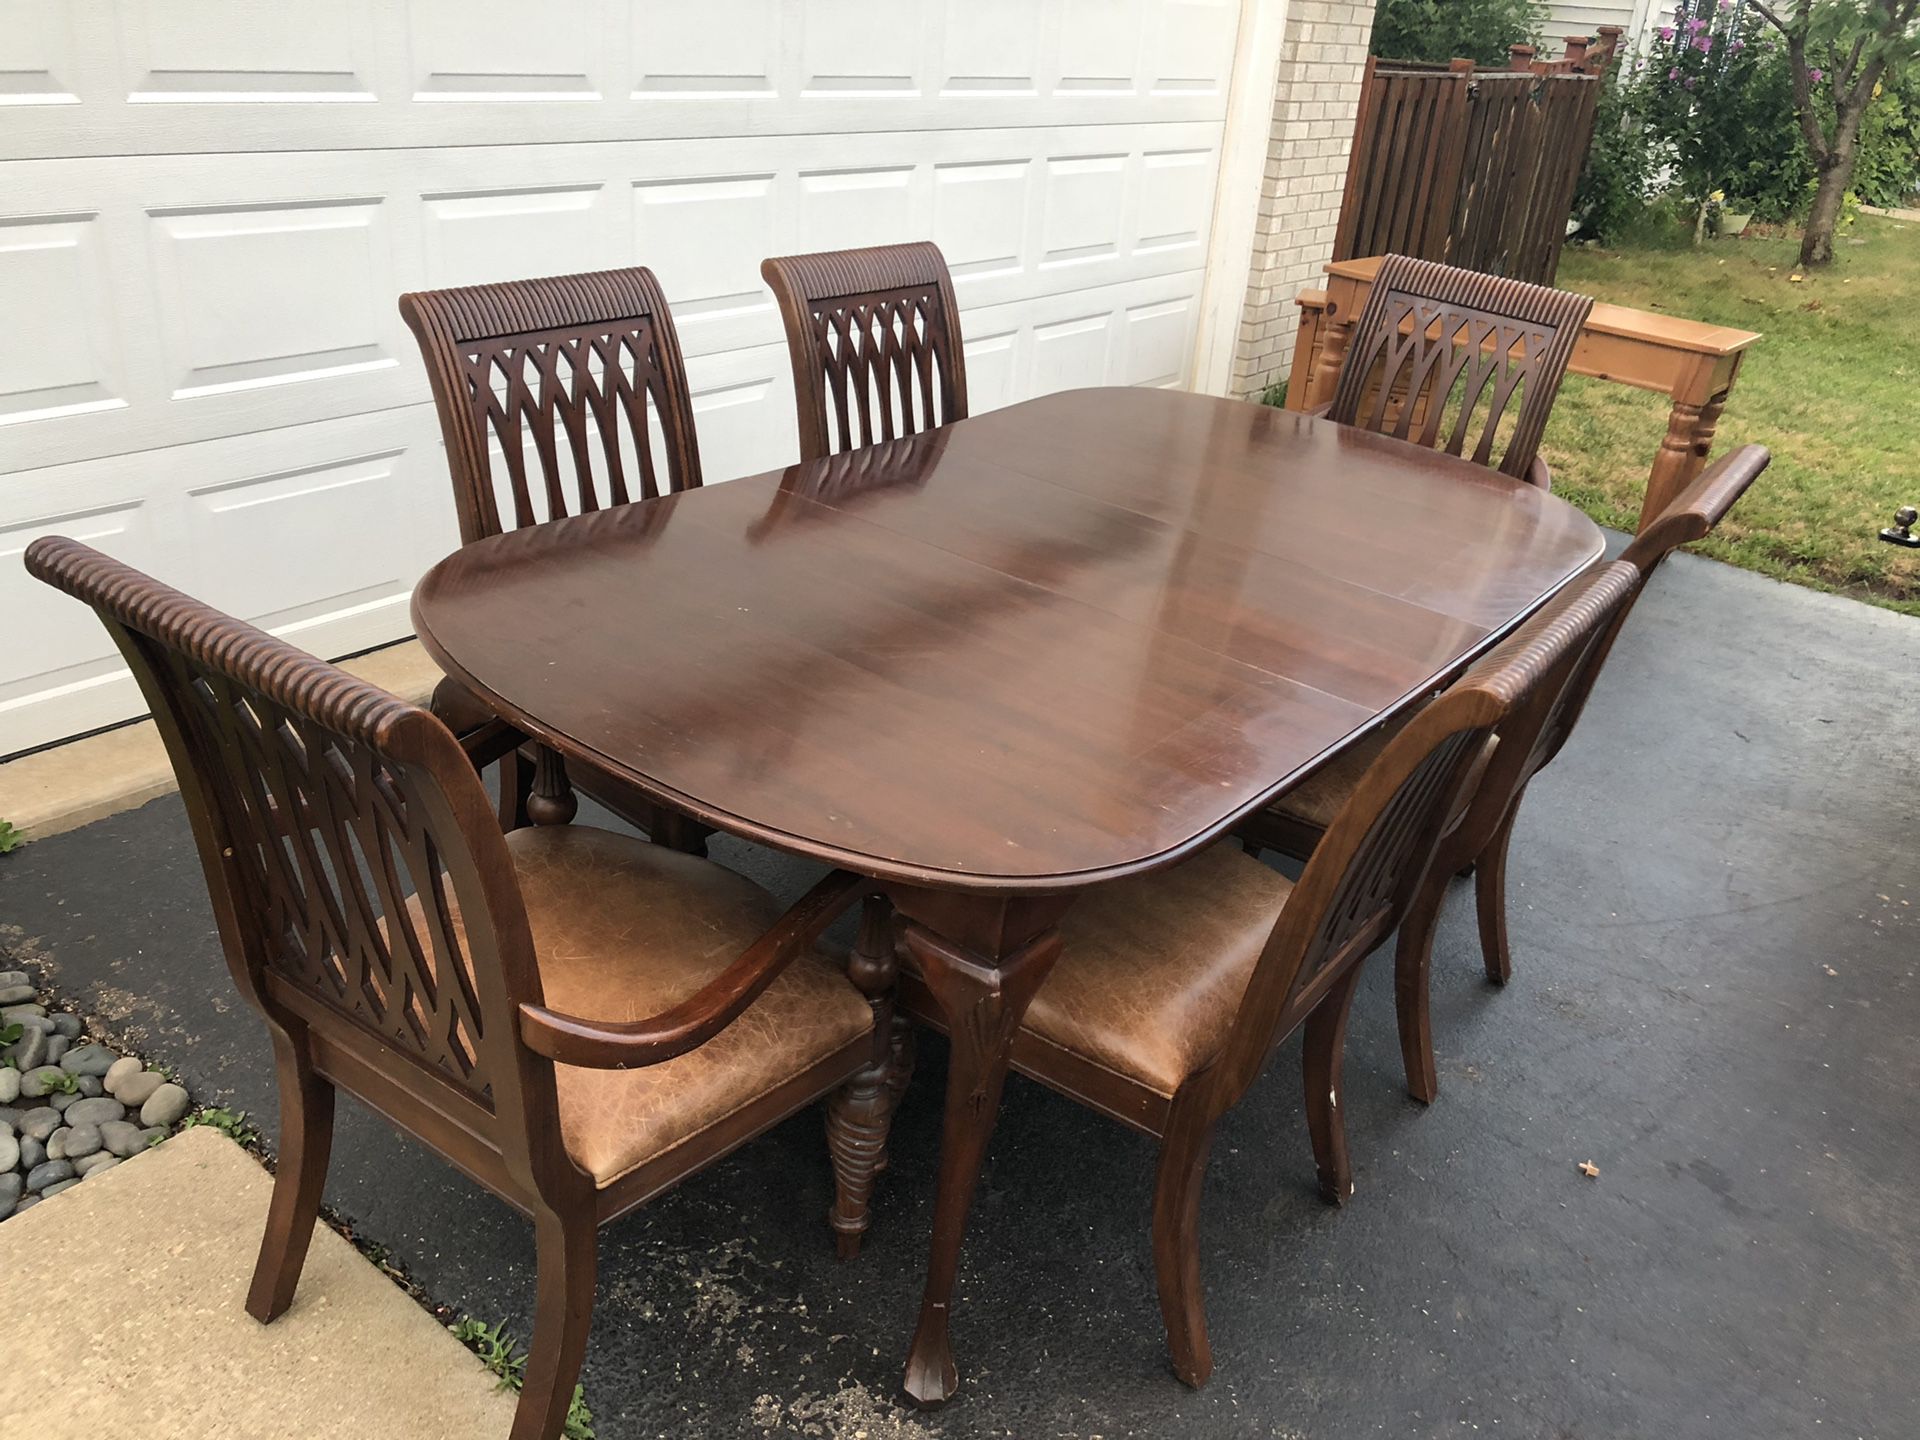 Bernhardt Embassy Row high end mahogany dining set - six chairs, table and leaf